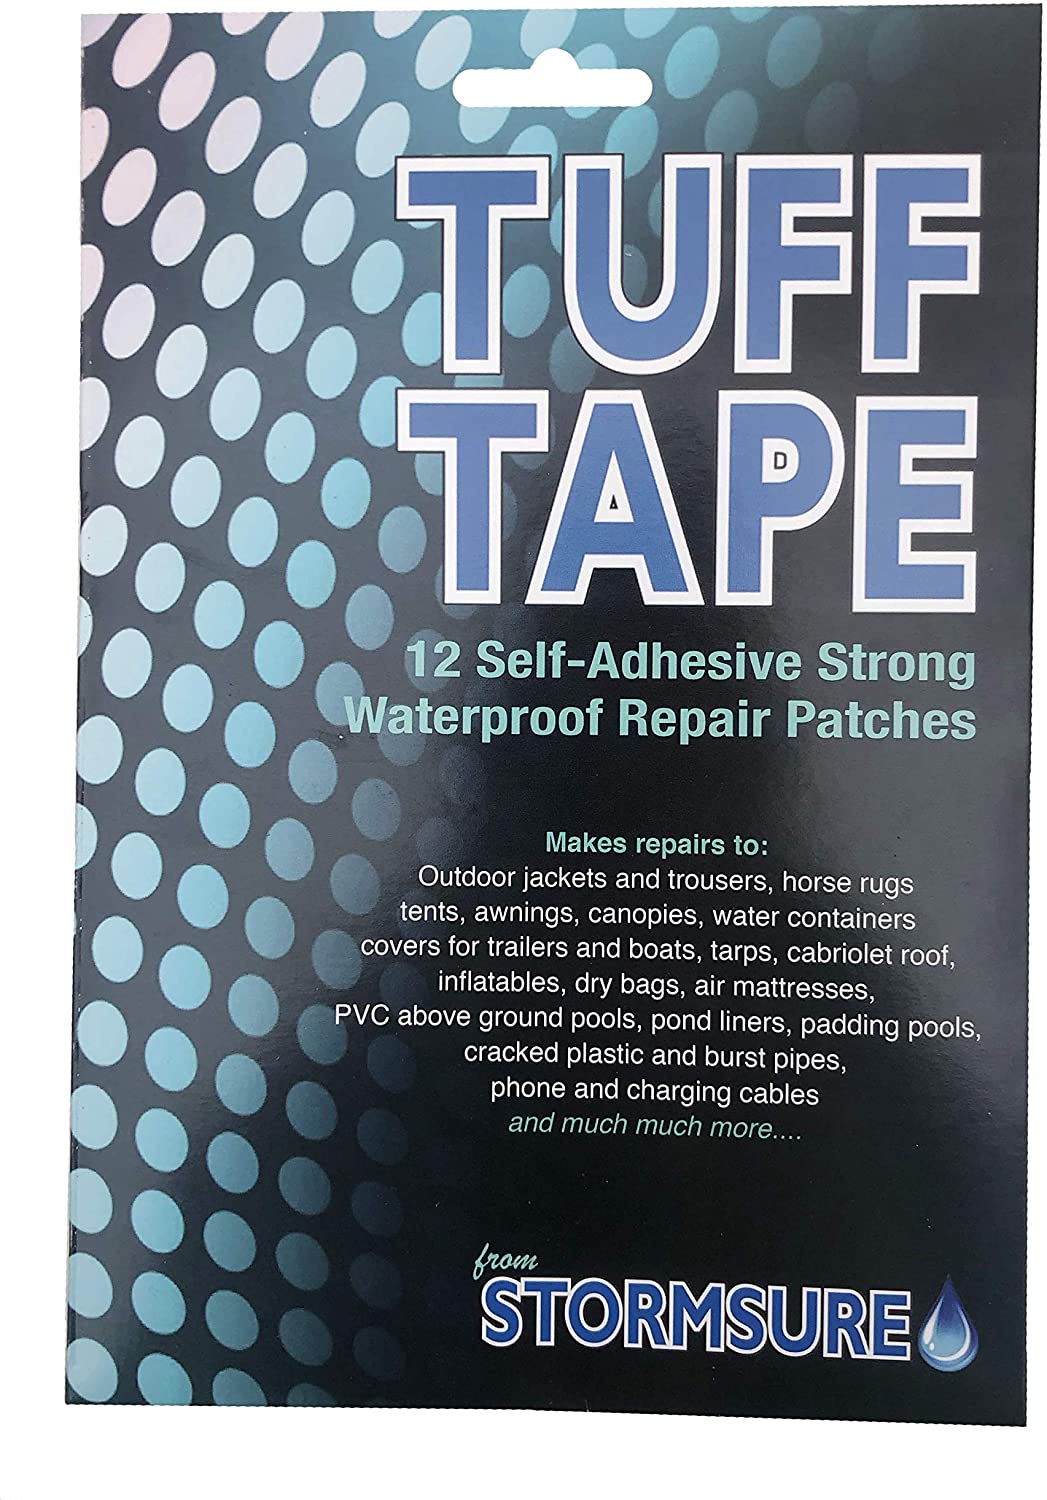 Stormsure Tuff Tape 12 parches impermeables